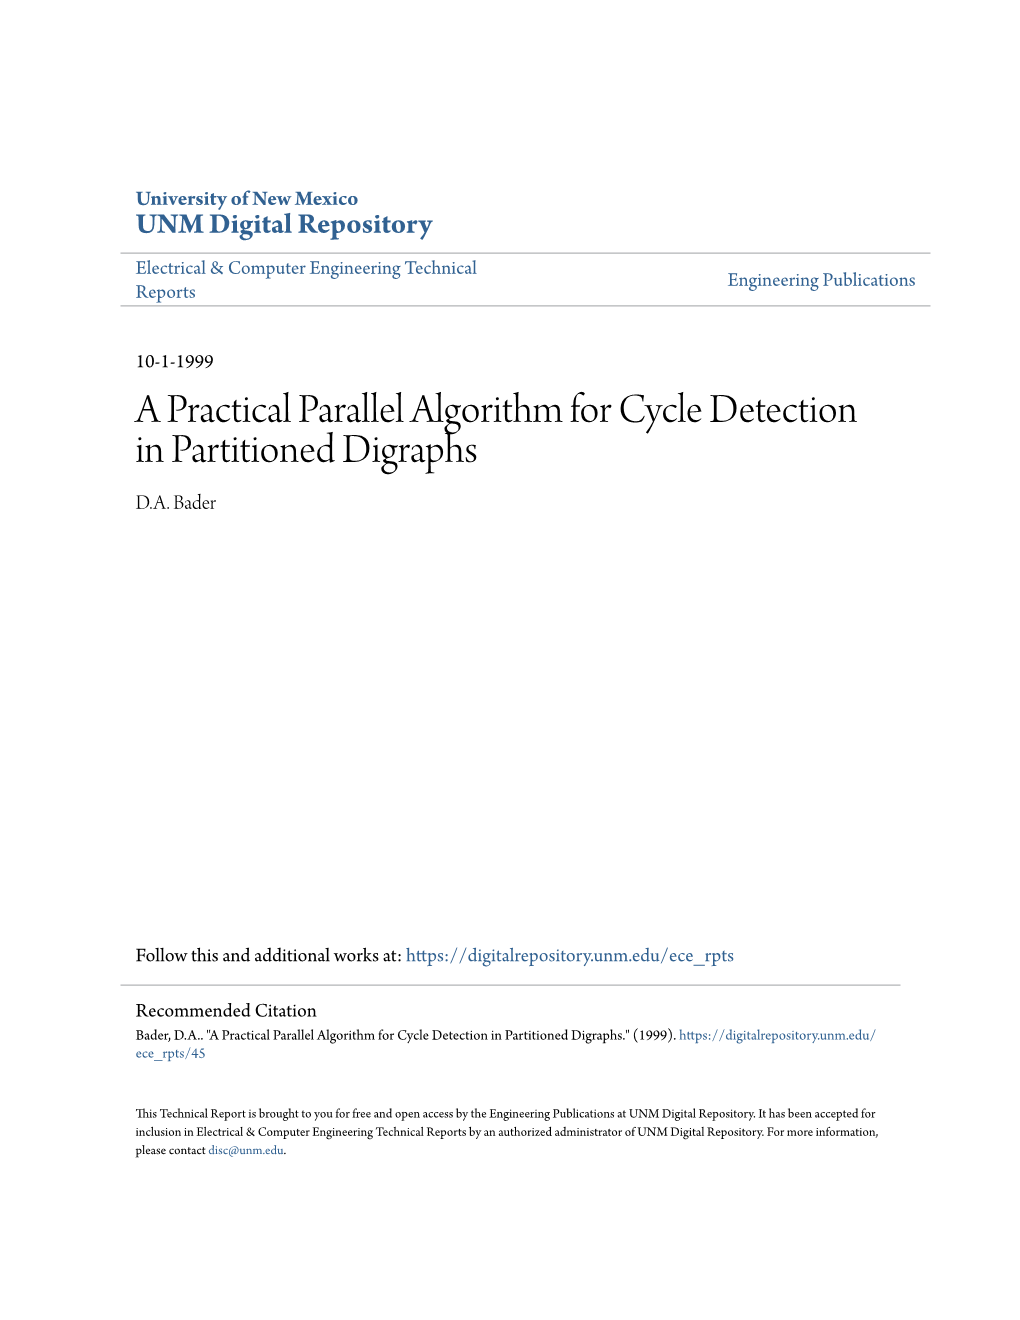 A Practical Parallel Algorithm for Cycle Detection in Partitioned Digraphs D.A